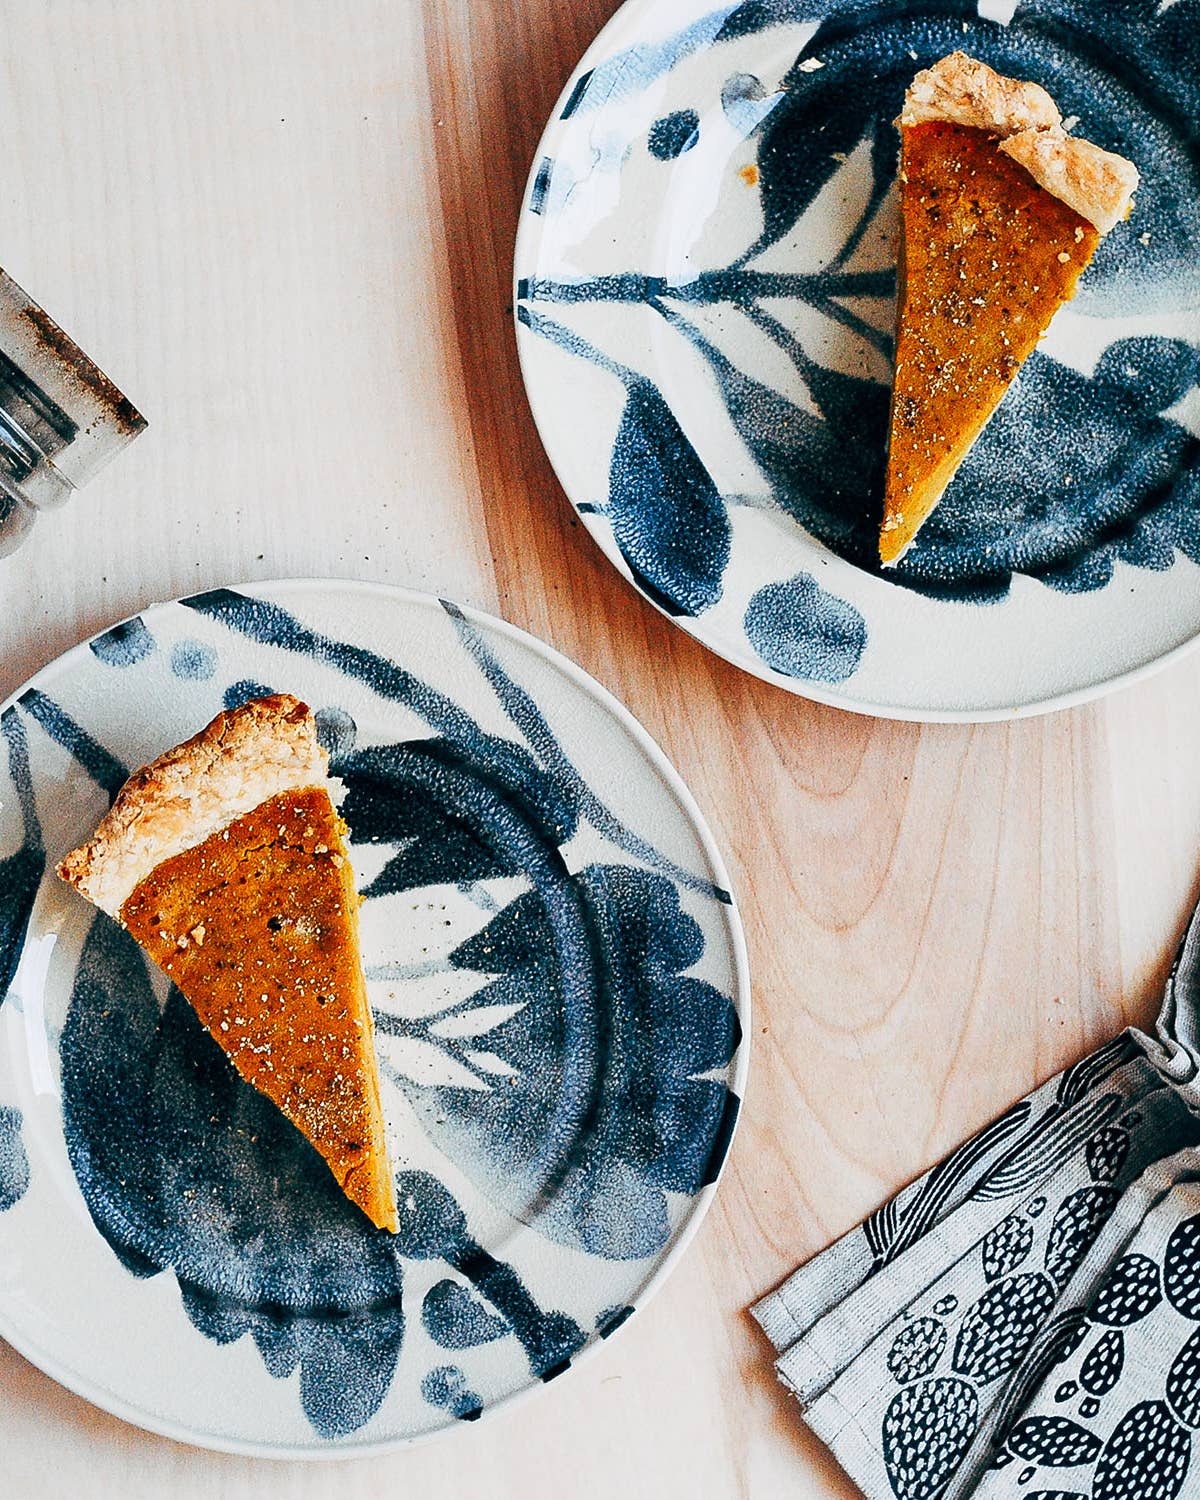 The Sweet and Spicy Better-than-Pumpkin Pie to Make this Thanksgiving